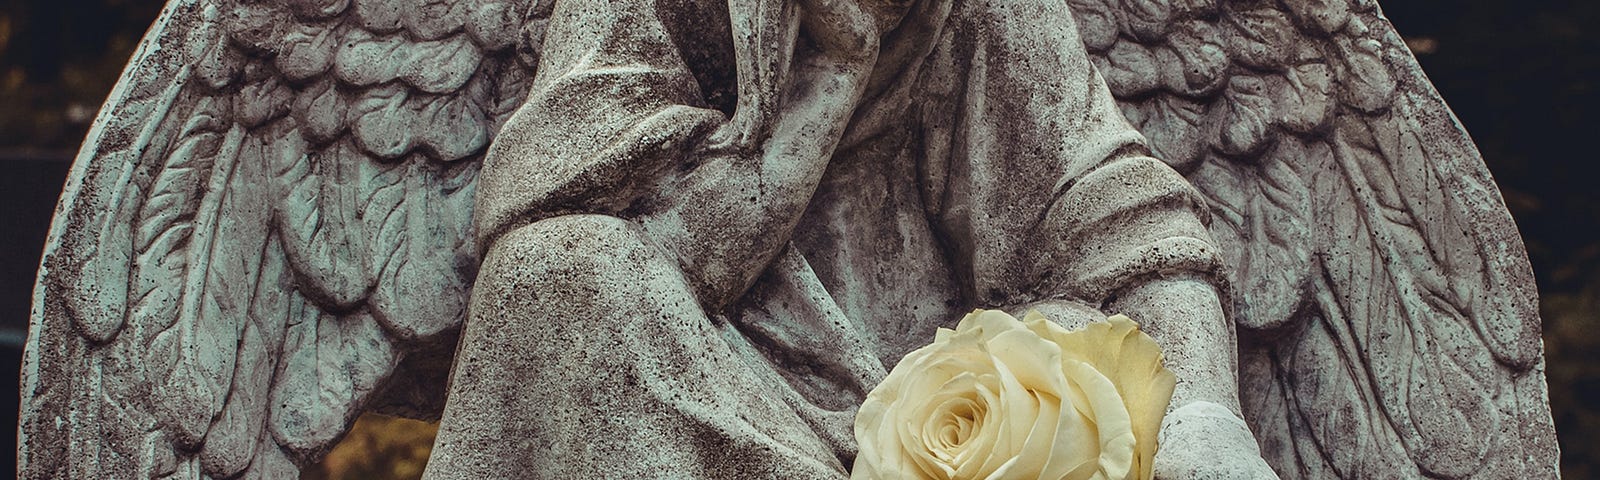 Stone angel, with a yellow rose